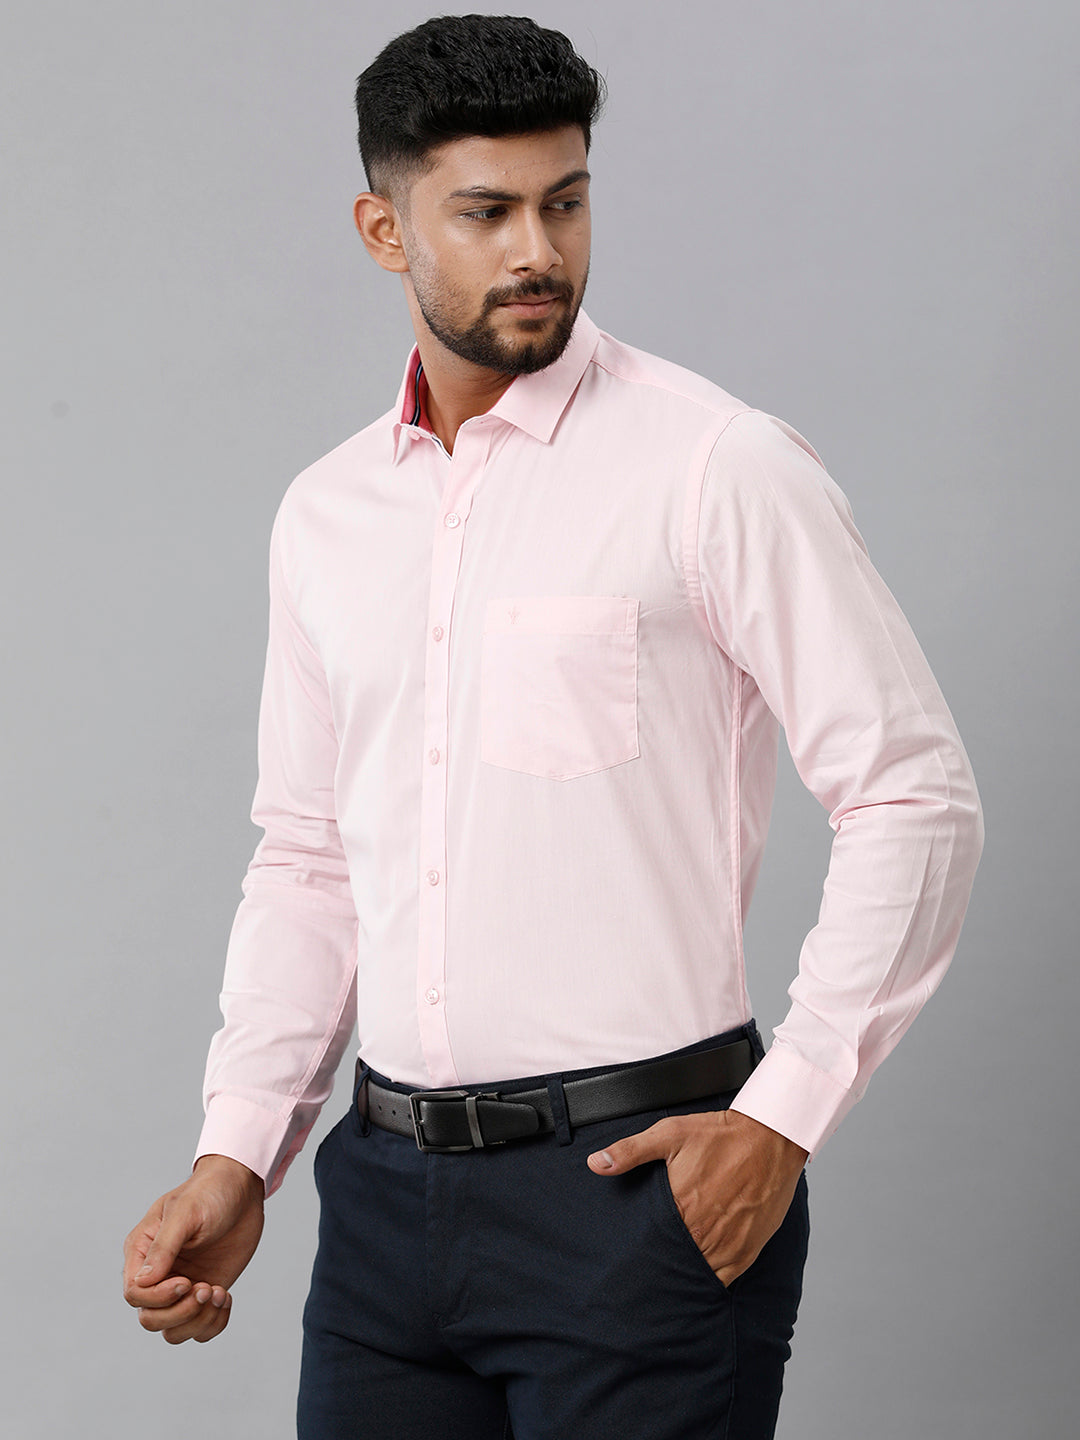 Mens Premium Cotton Formal Shirt Full Sleeves Light Pink MH G115-Front view